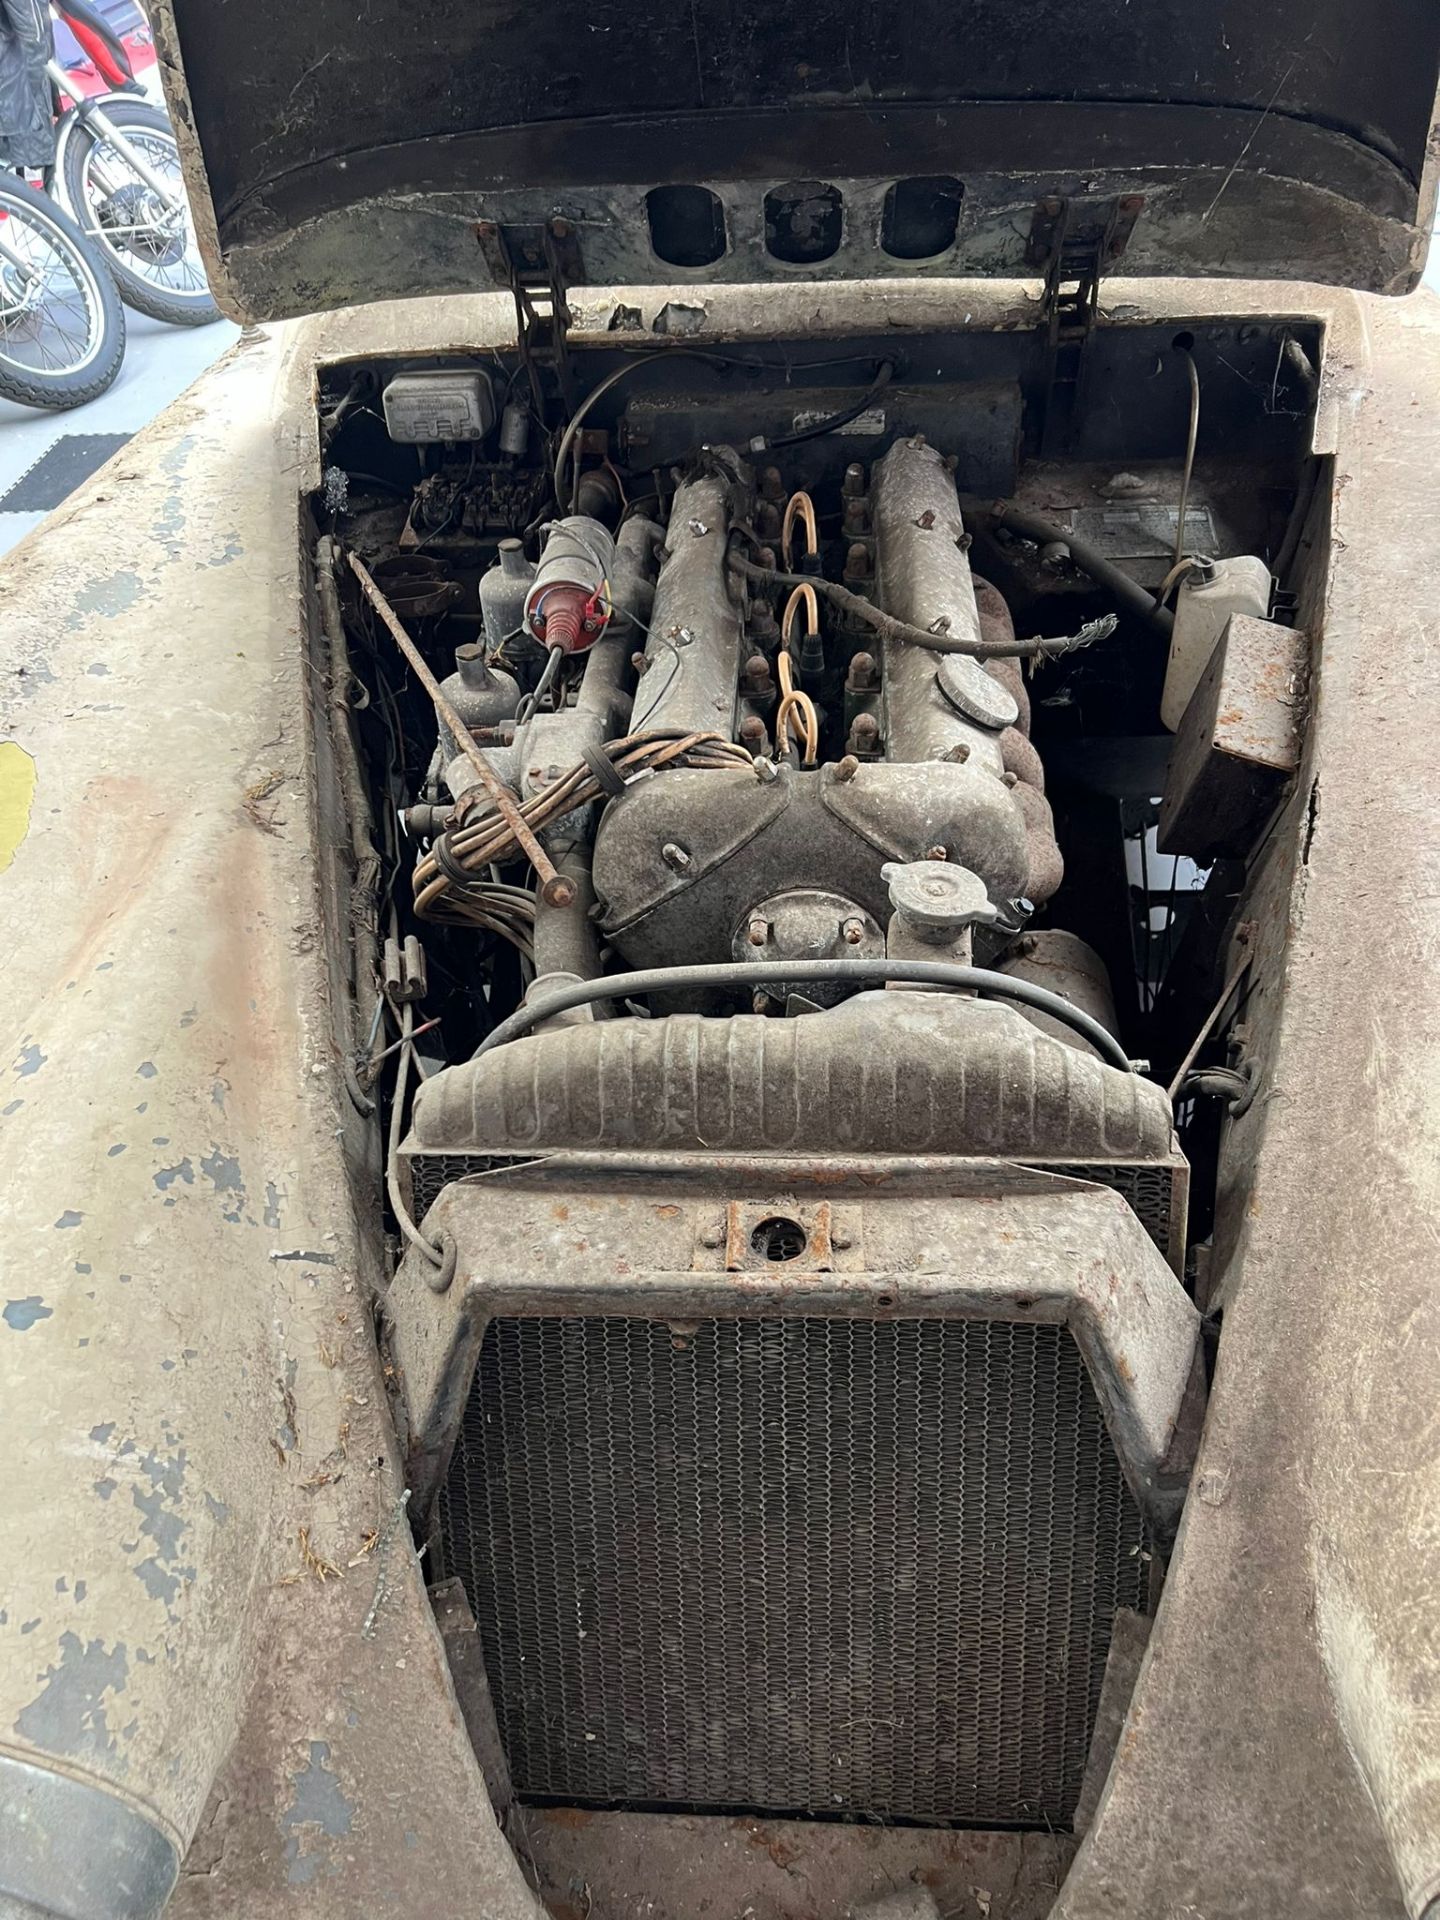 Jaguar XK150 3.4 Drop Head Coupe 1958 Barn Find. Matching numbers. - Image 14 of 14